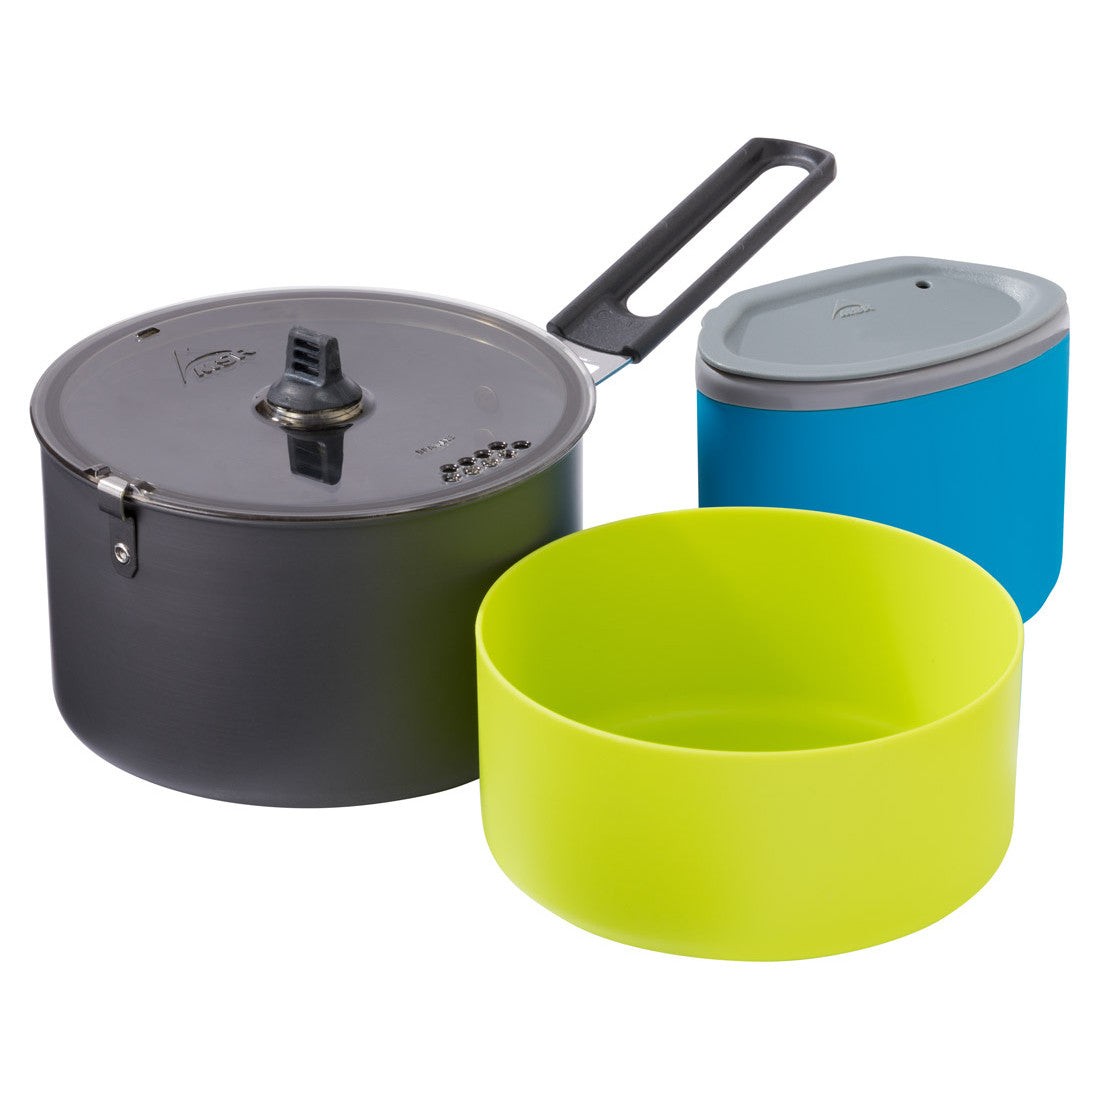 MSR Trail Lite Solo Cook Set, showing all components together